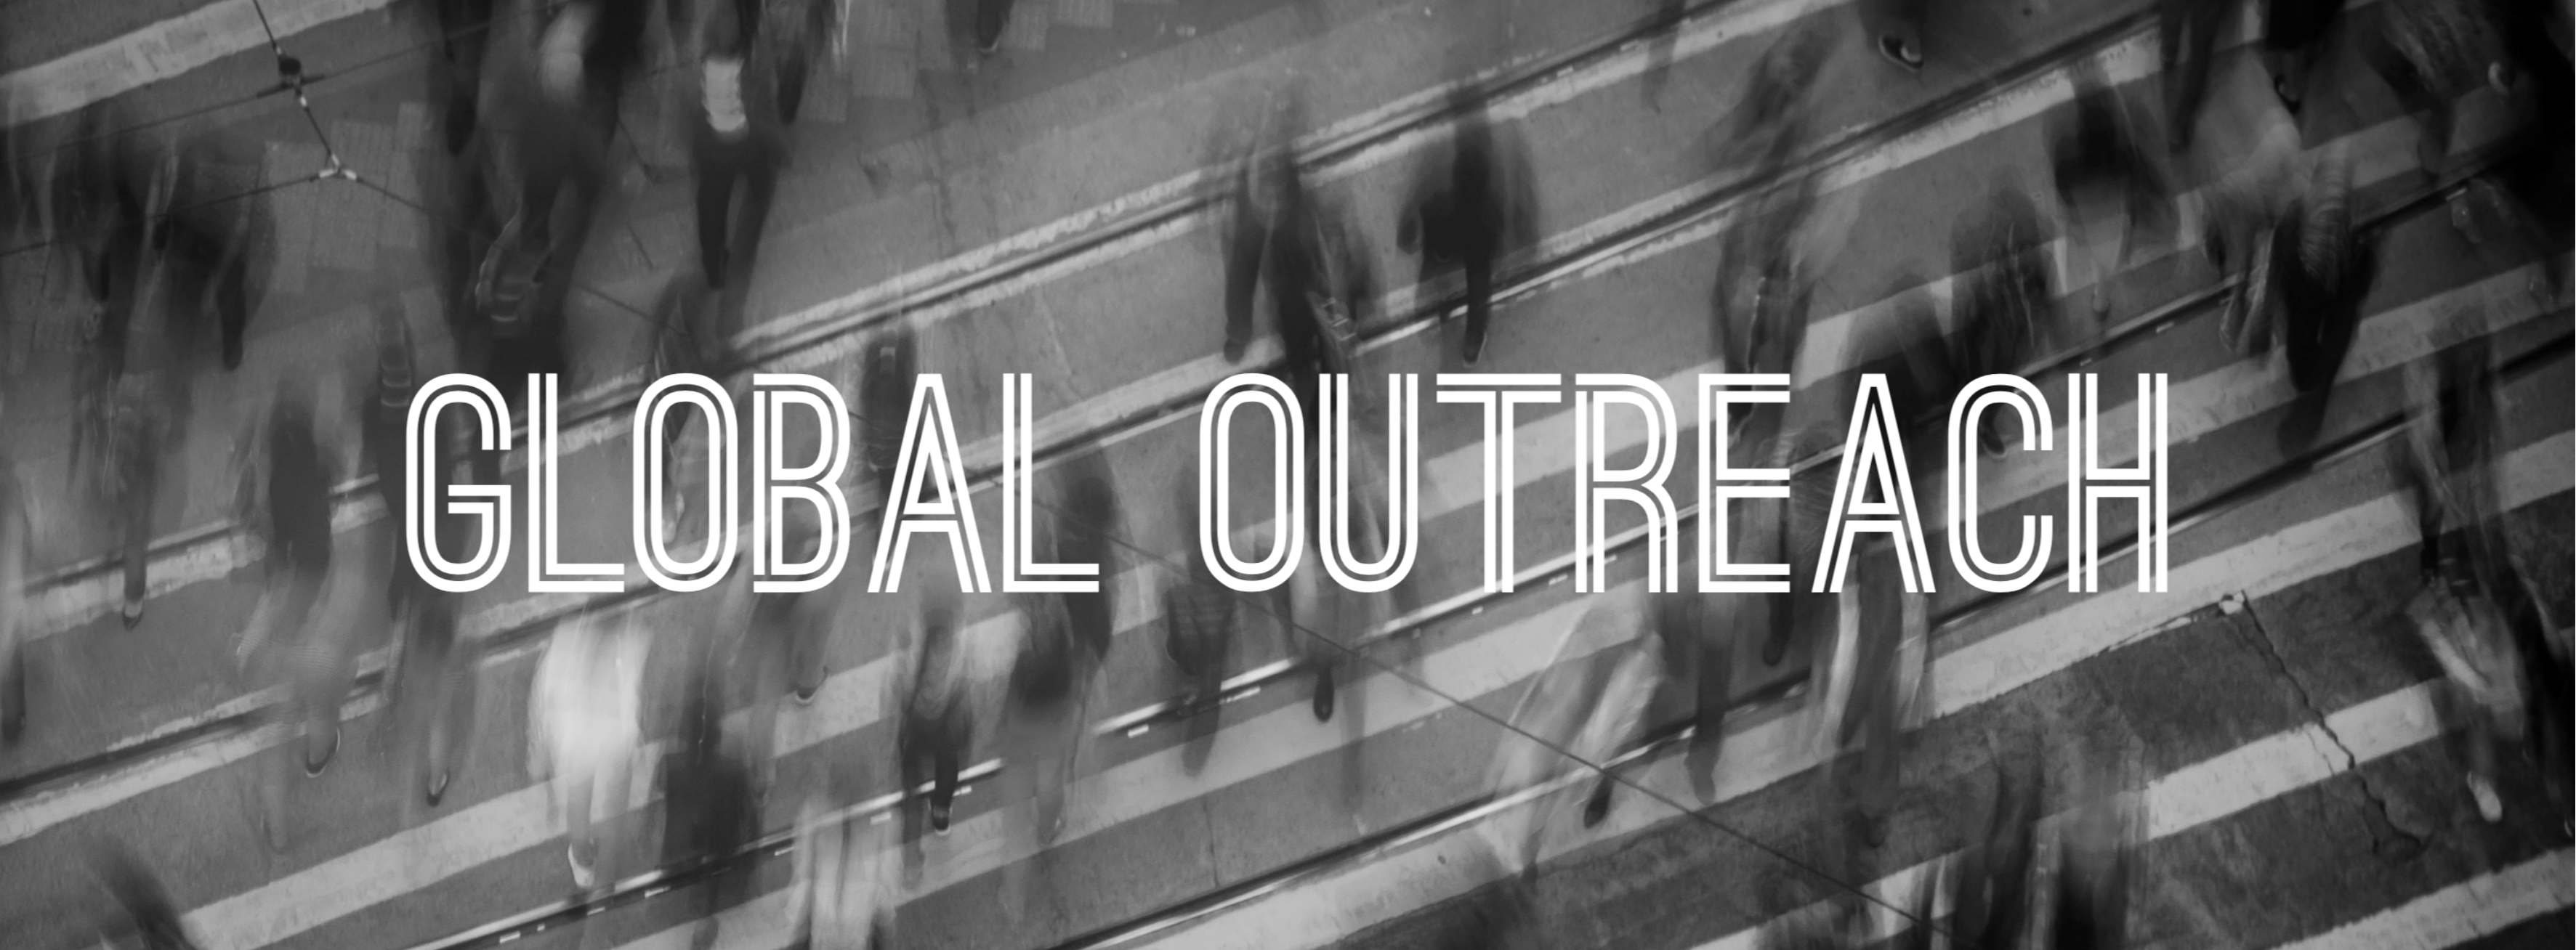 Global Outreach Page Top